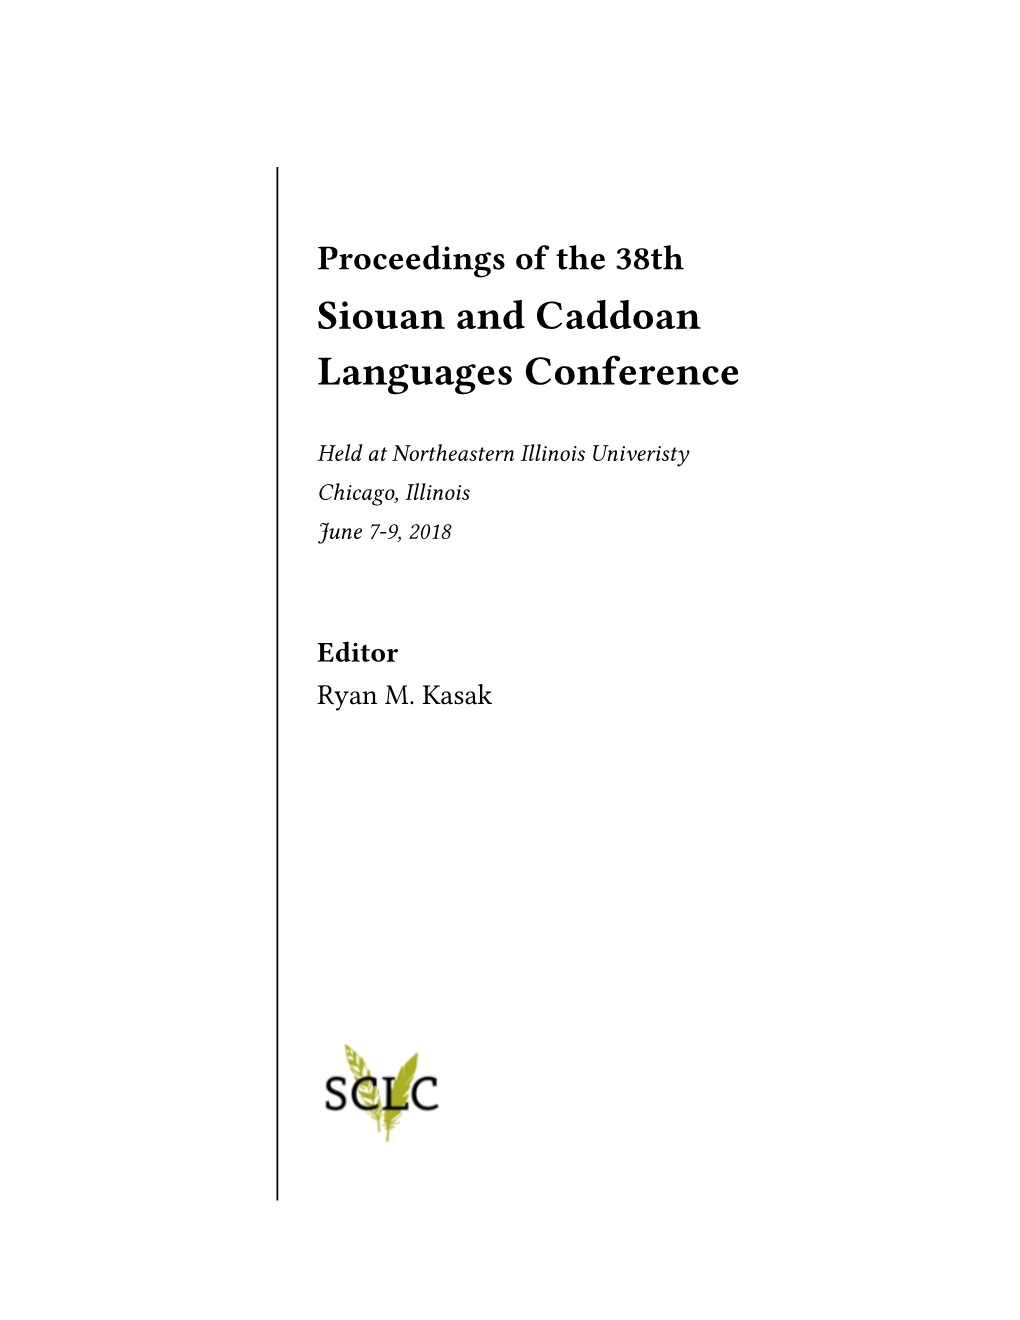 38Th Annual Siouan and Caddoan Languages Conference Proceedings